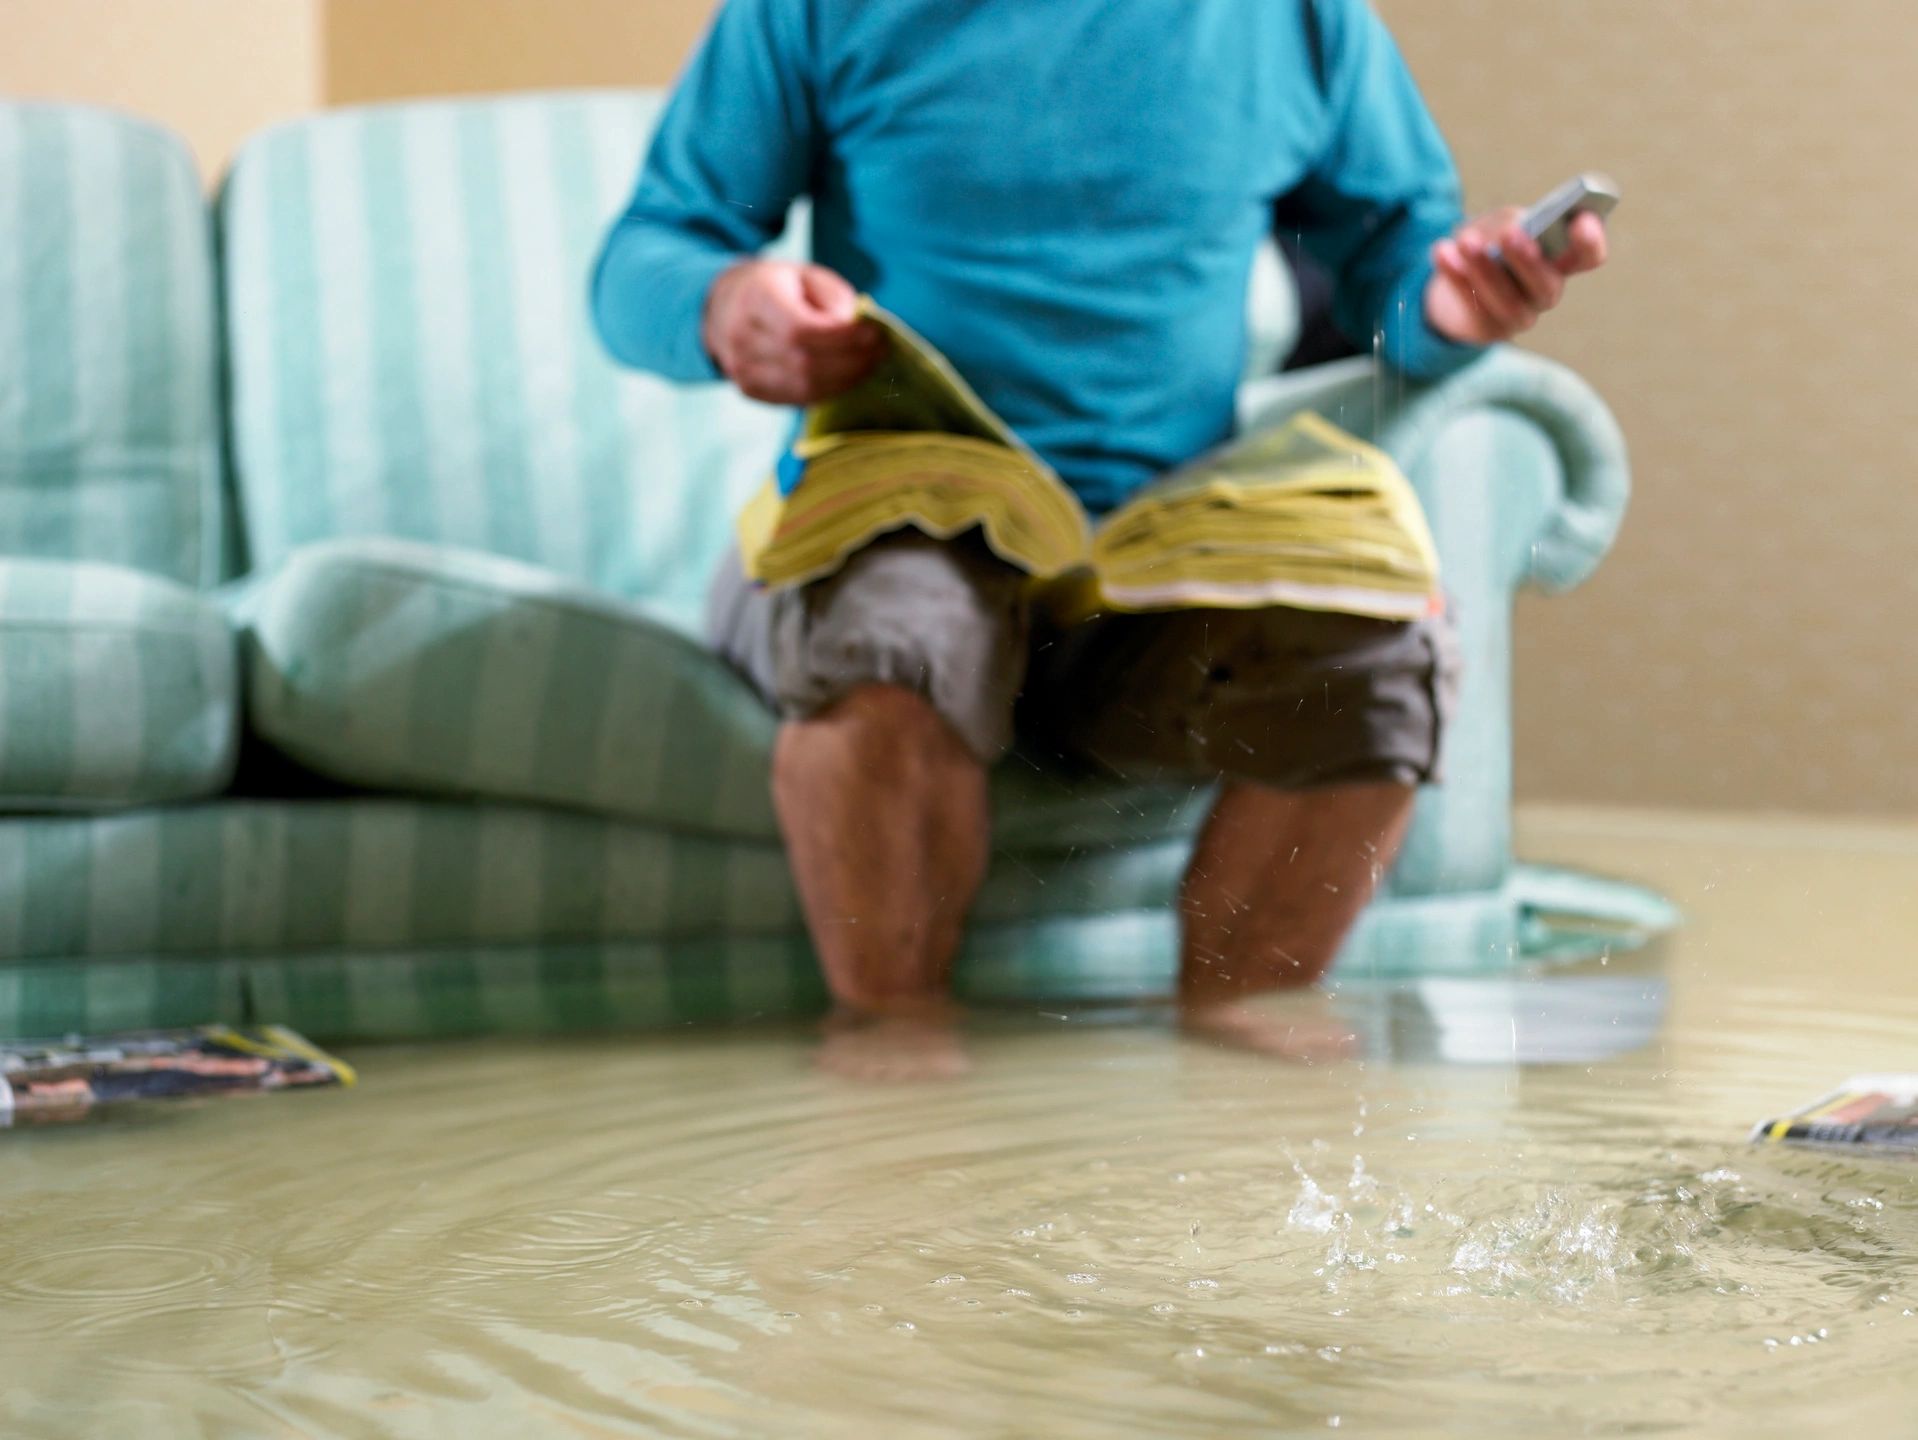 A person sitting on a couch with a book and phone in hand while the floor is flooded